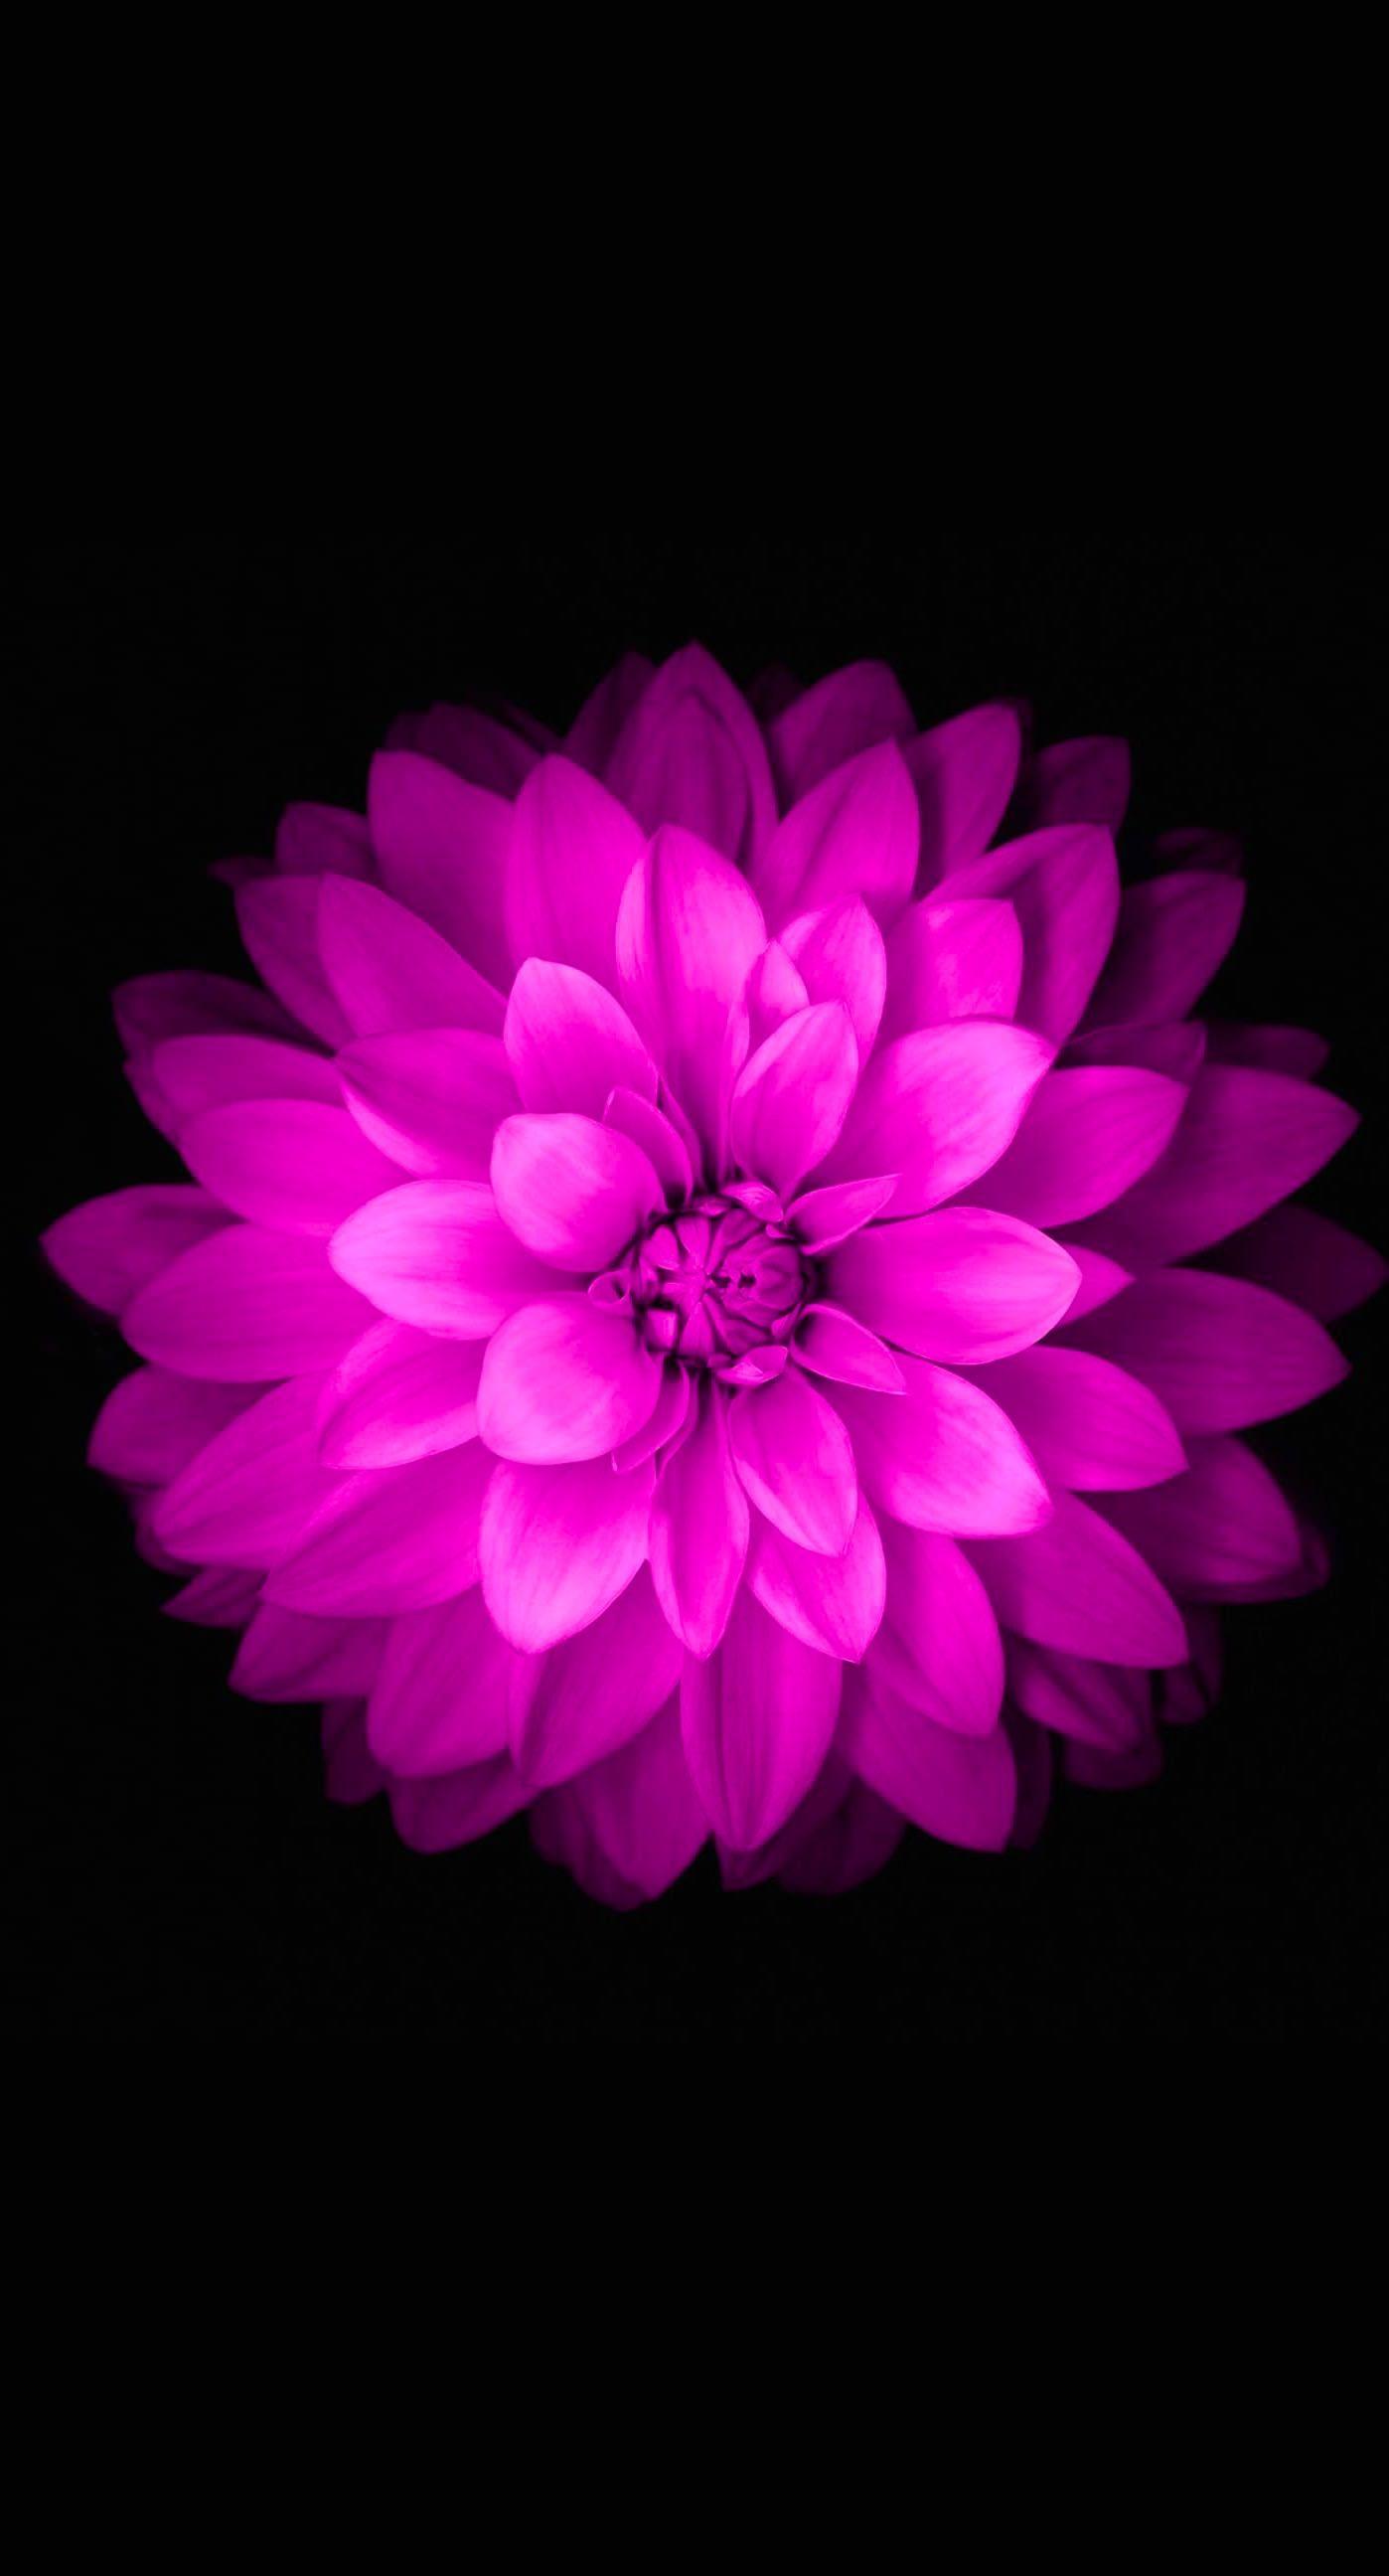 Flowers Iphone 5 Wallpapers Top Free